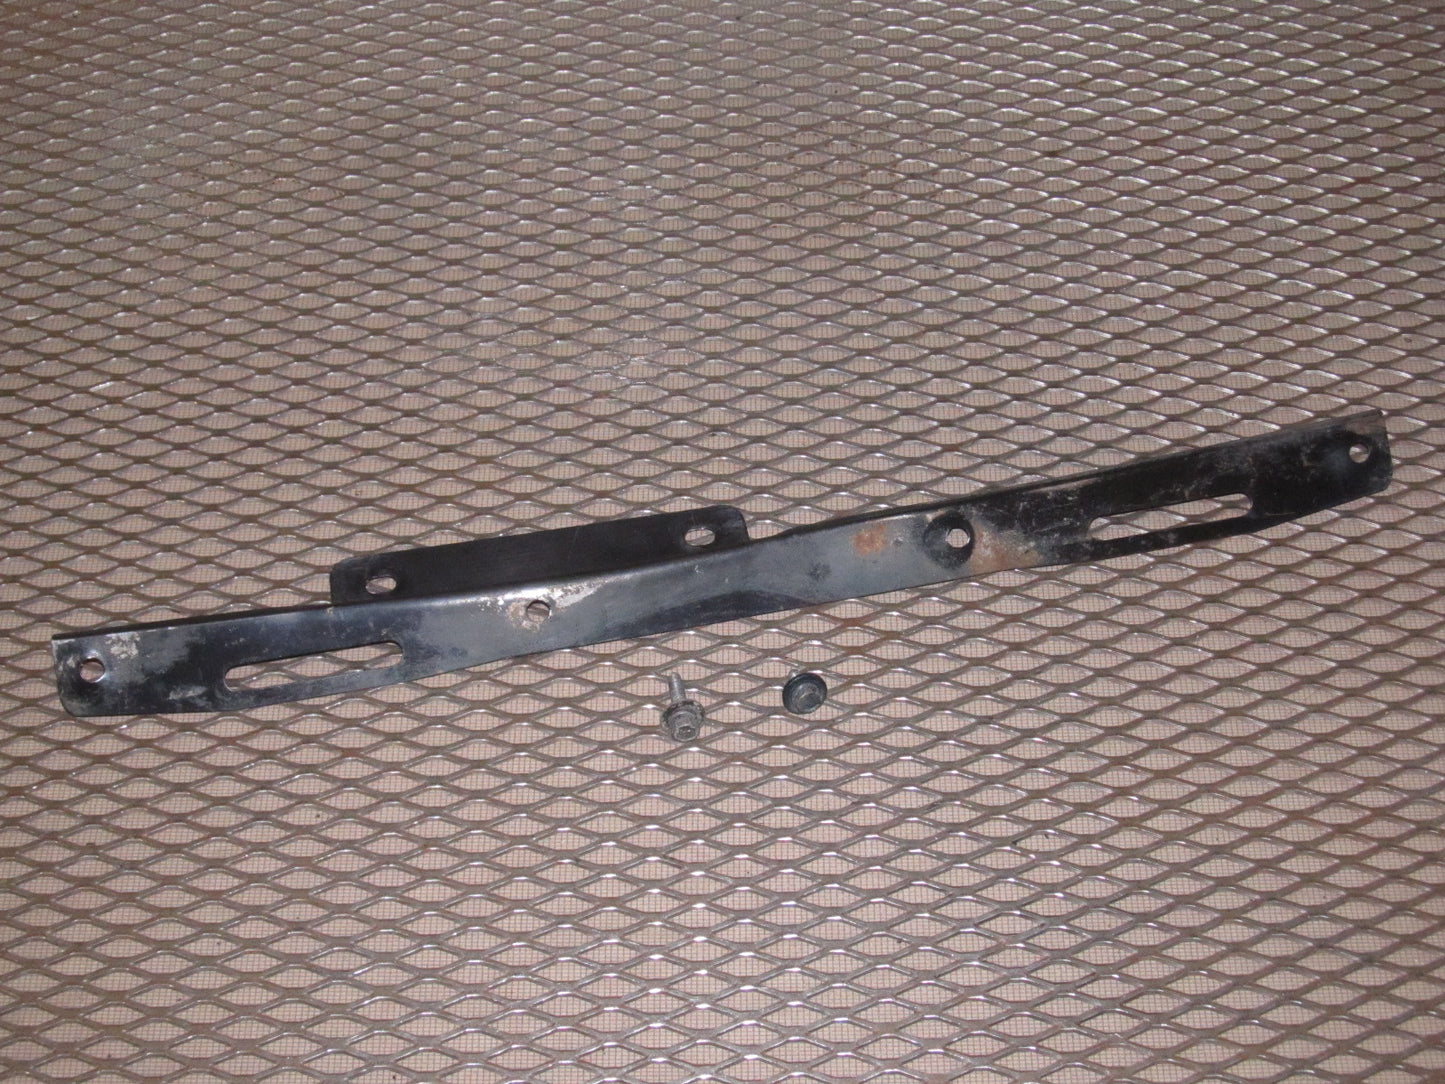 97 98 99 Mitsubishi Eclipse Convertible OEM Rear Bumper Cover Lower Mounting Gasket Plate